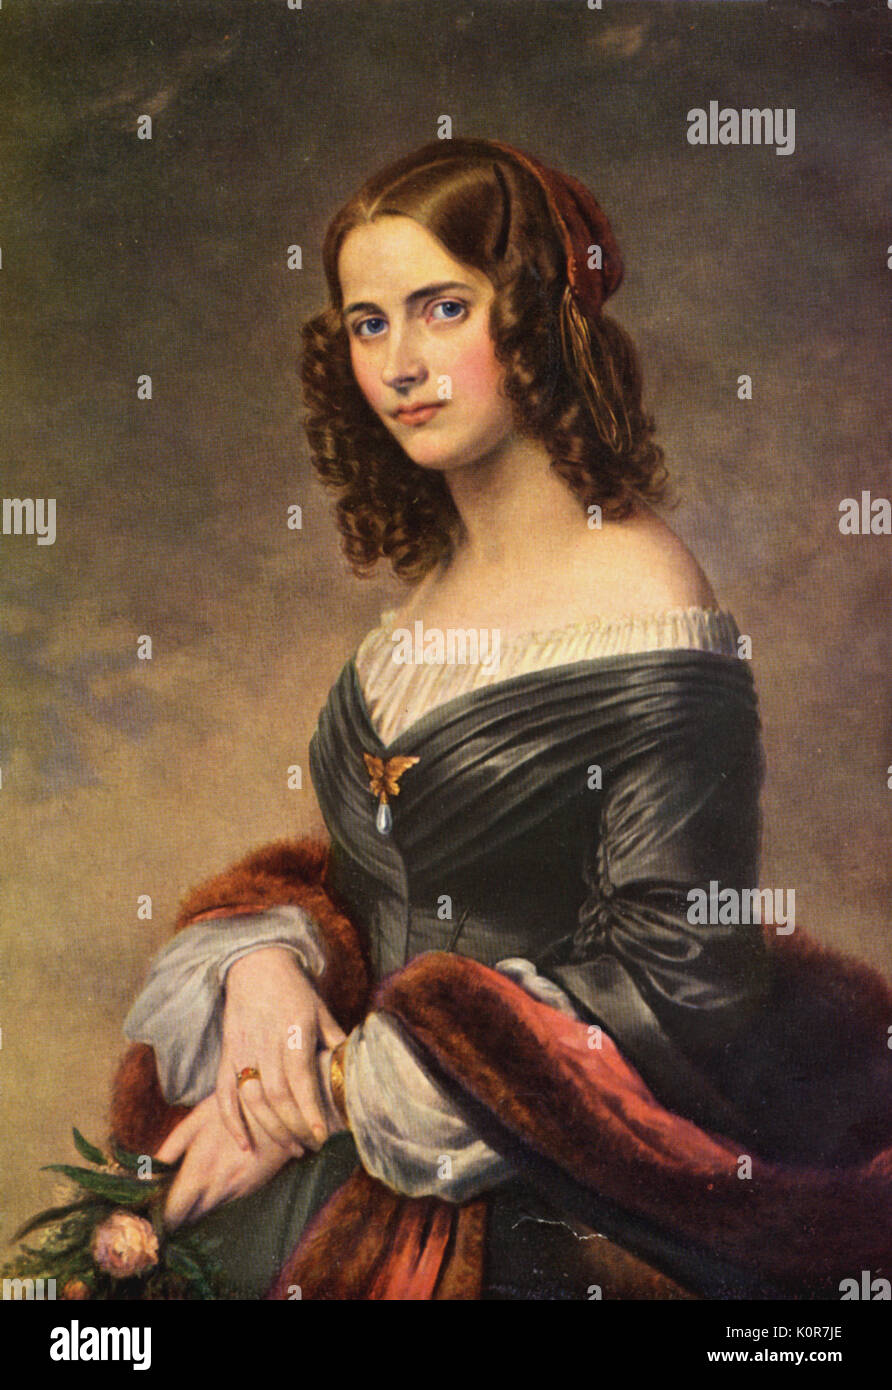 Cécile (or Cacilie) Mendelssohn Bartholdy (née Jeanrenaud) -  wife of German composer Felix Mendelssohn. After painting by Edouard (or Eduard) Magnus (German artist: 7 January 1799 - 8 August 1872 . CMB, 1817 - 1853. Stock Photo